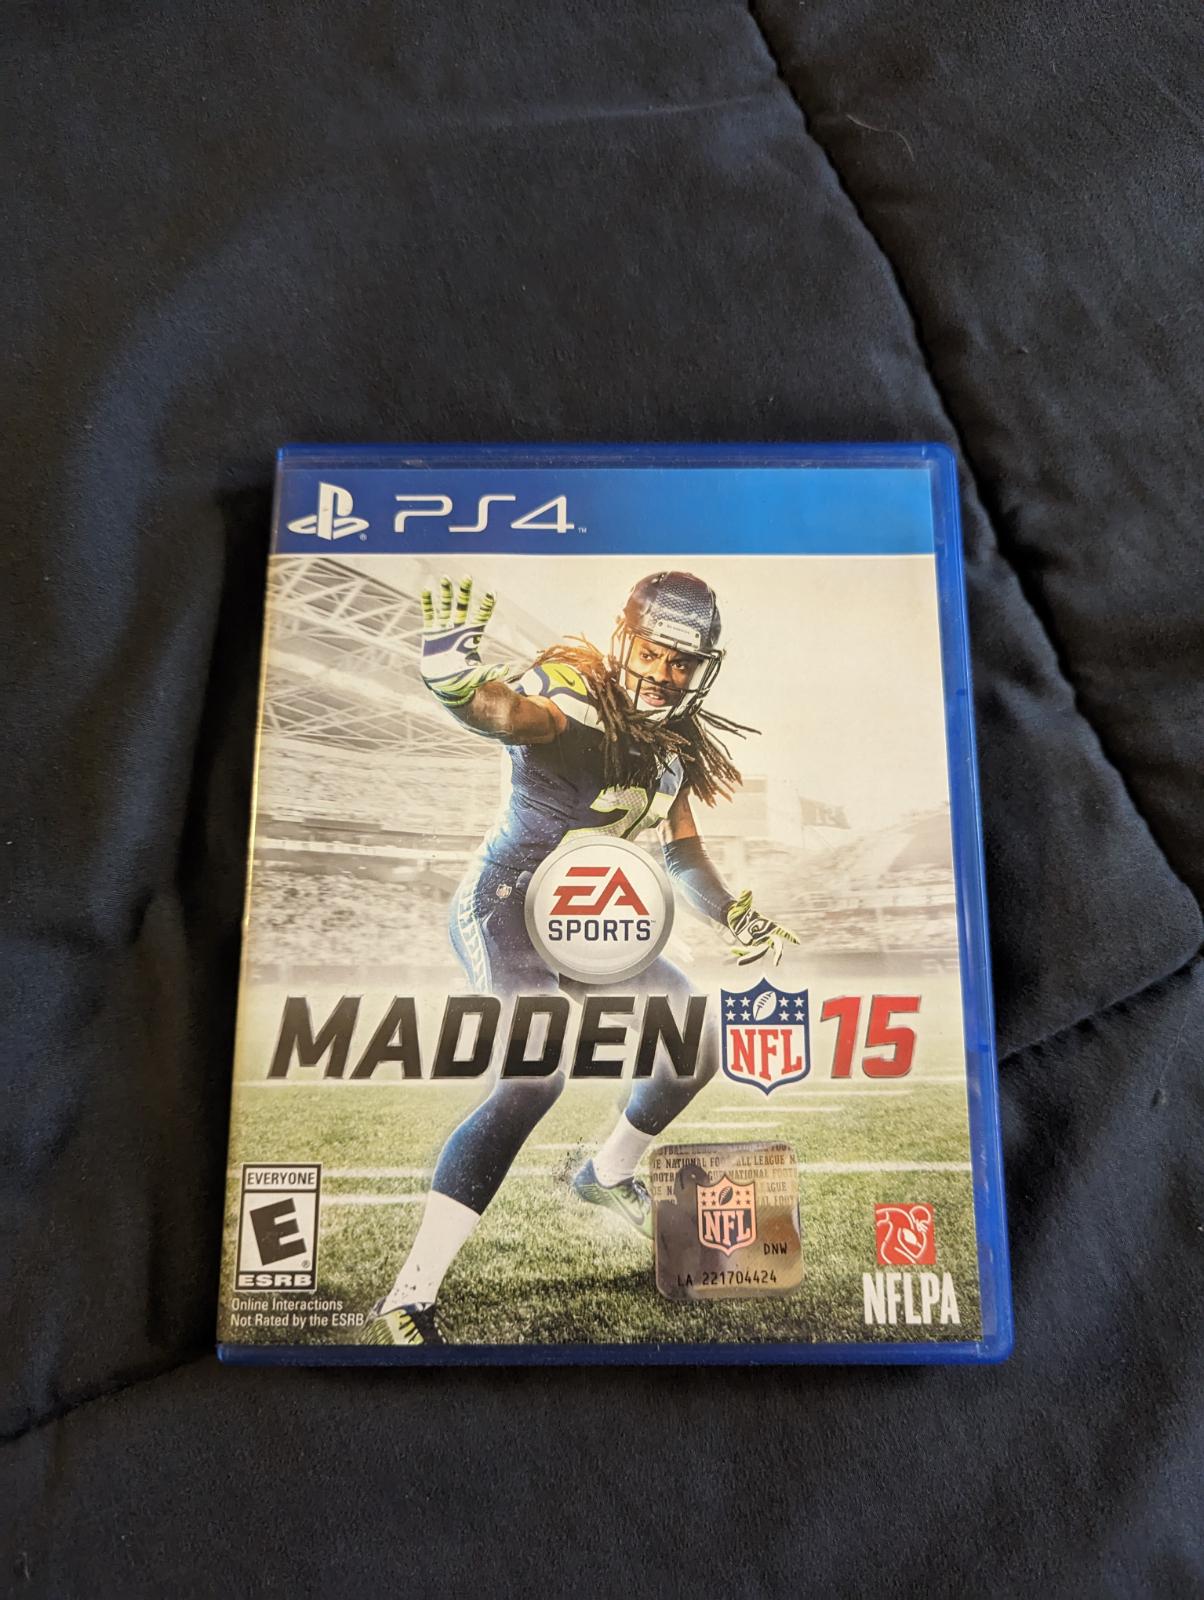 Madden NFL 15, Item, Box, and Manual